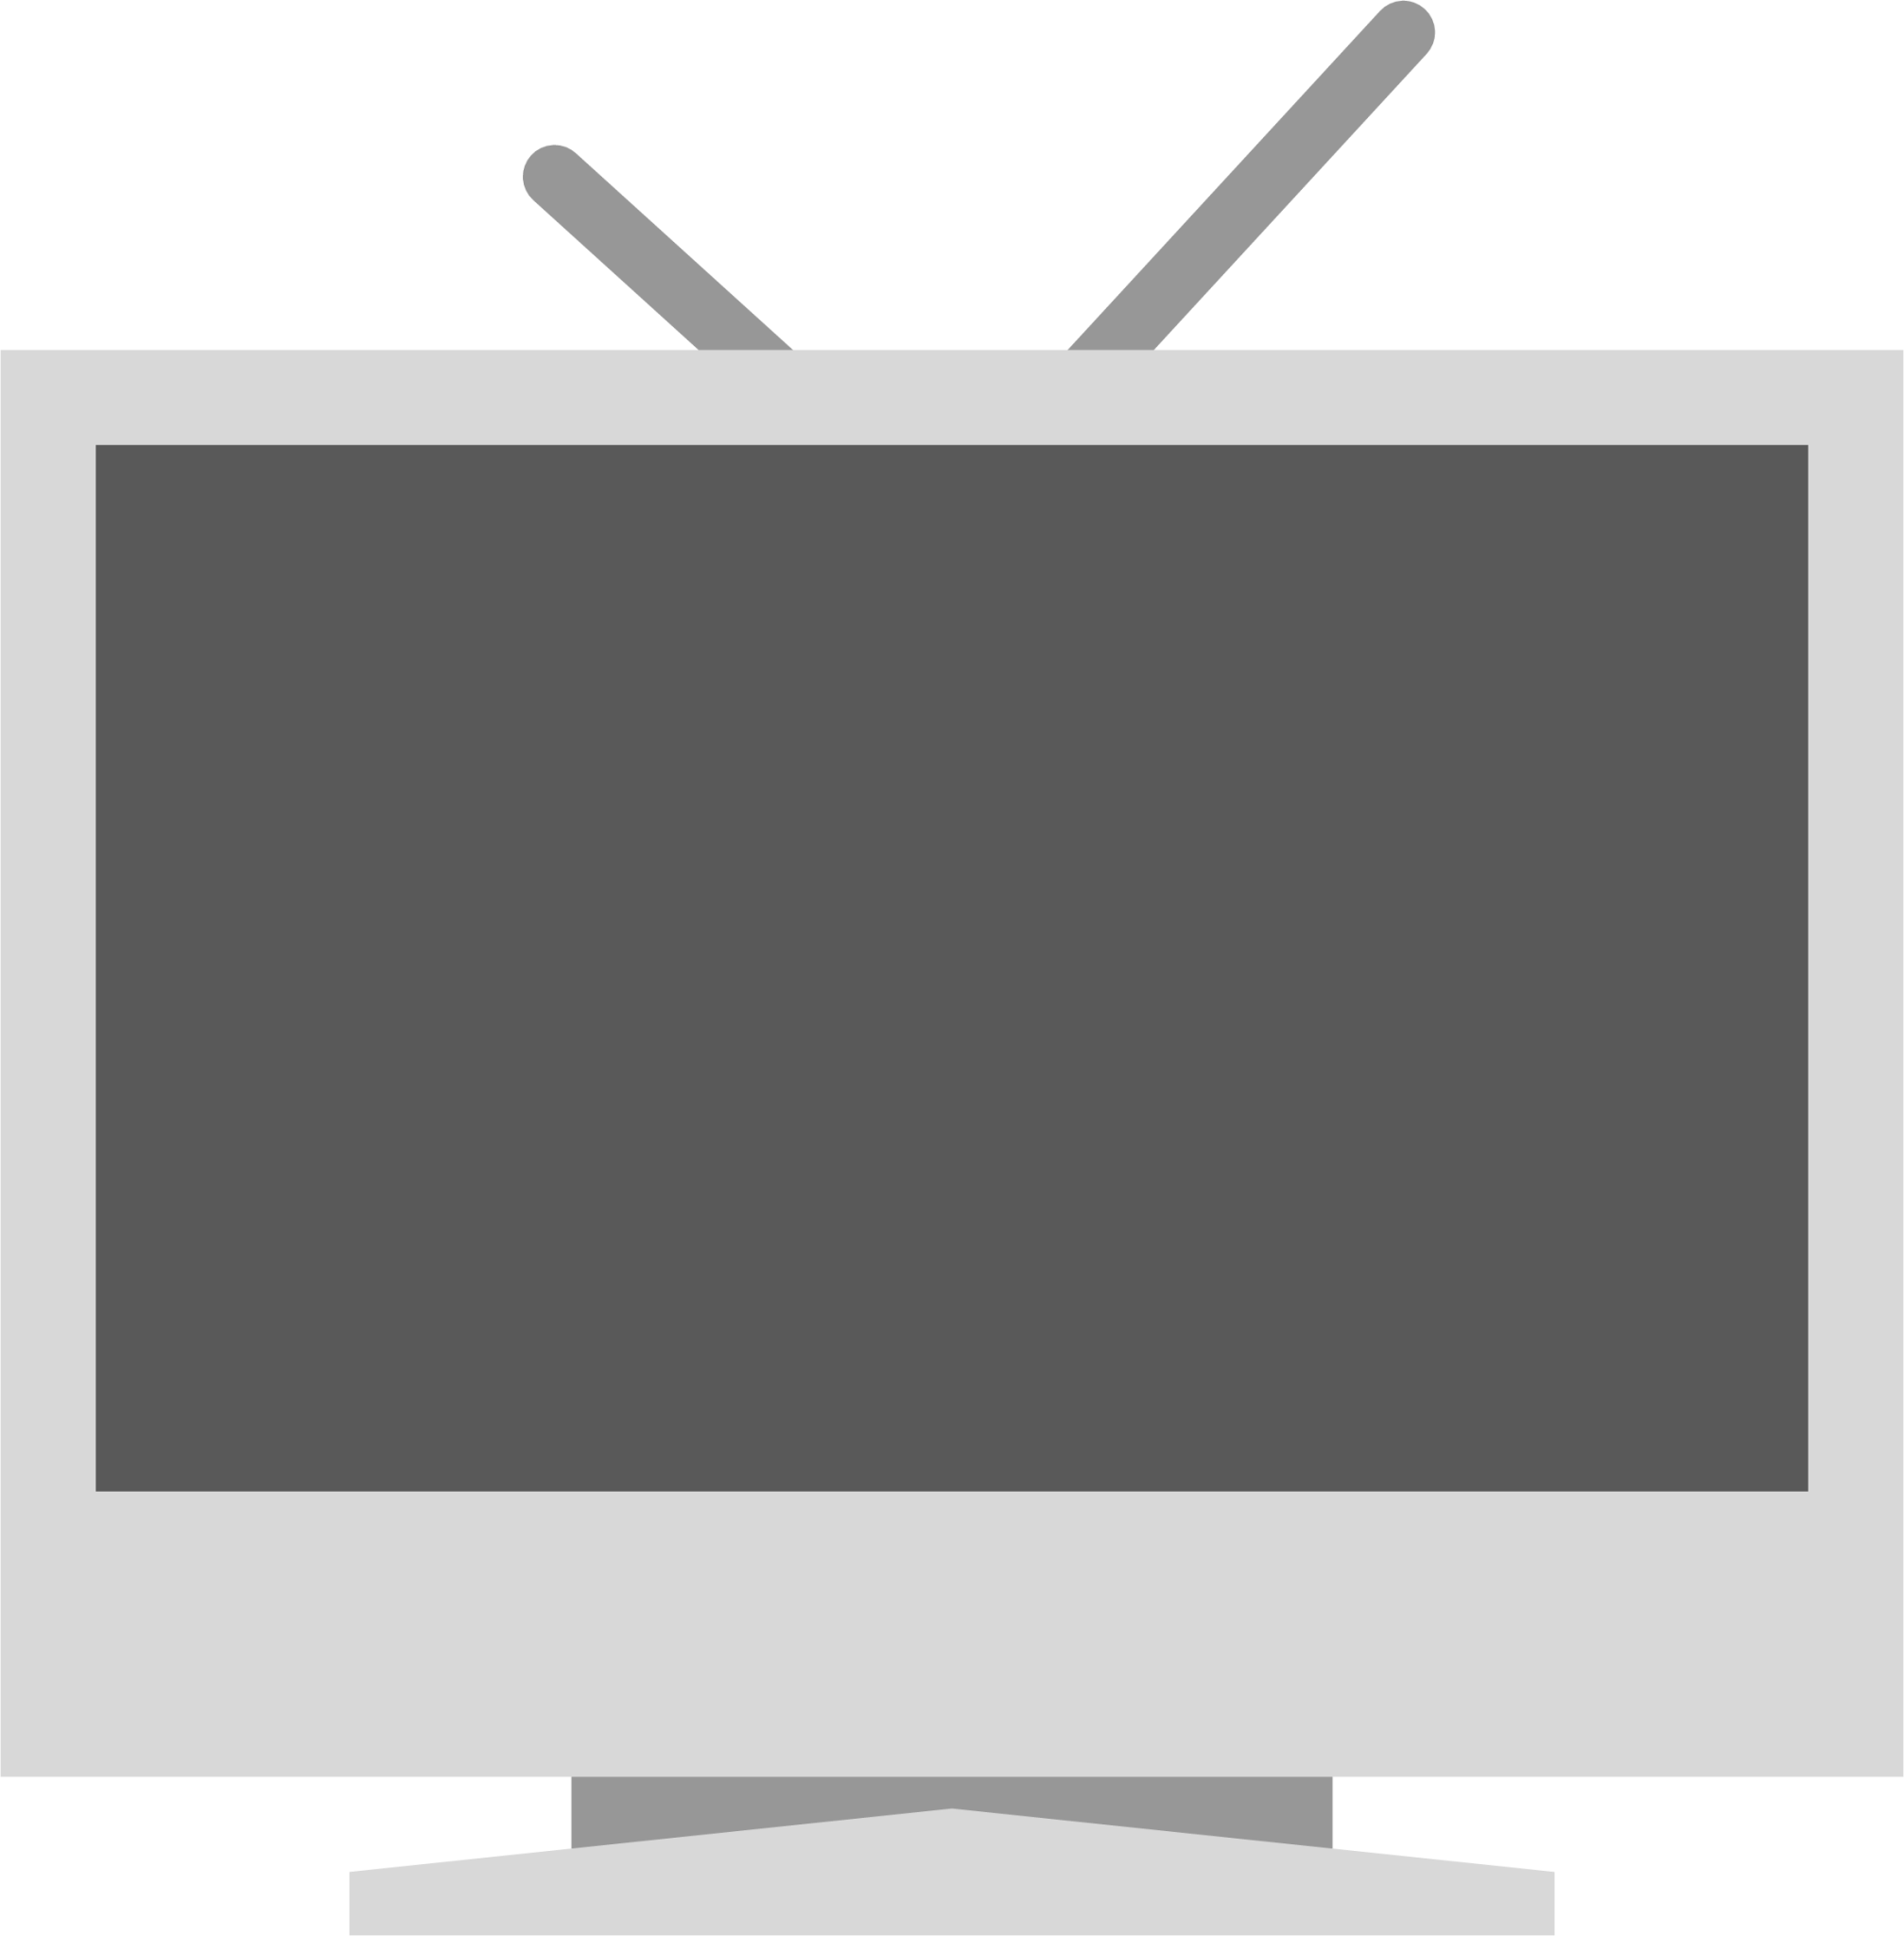 old tv icon